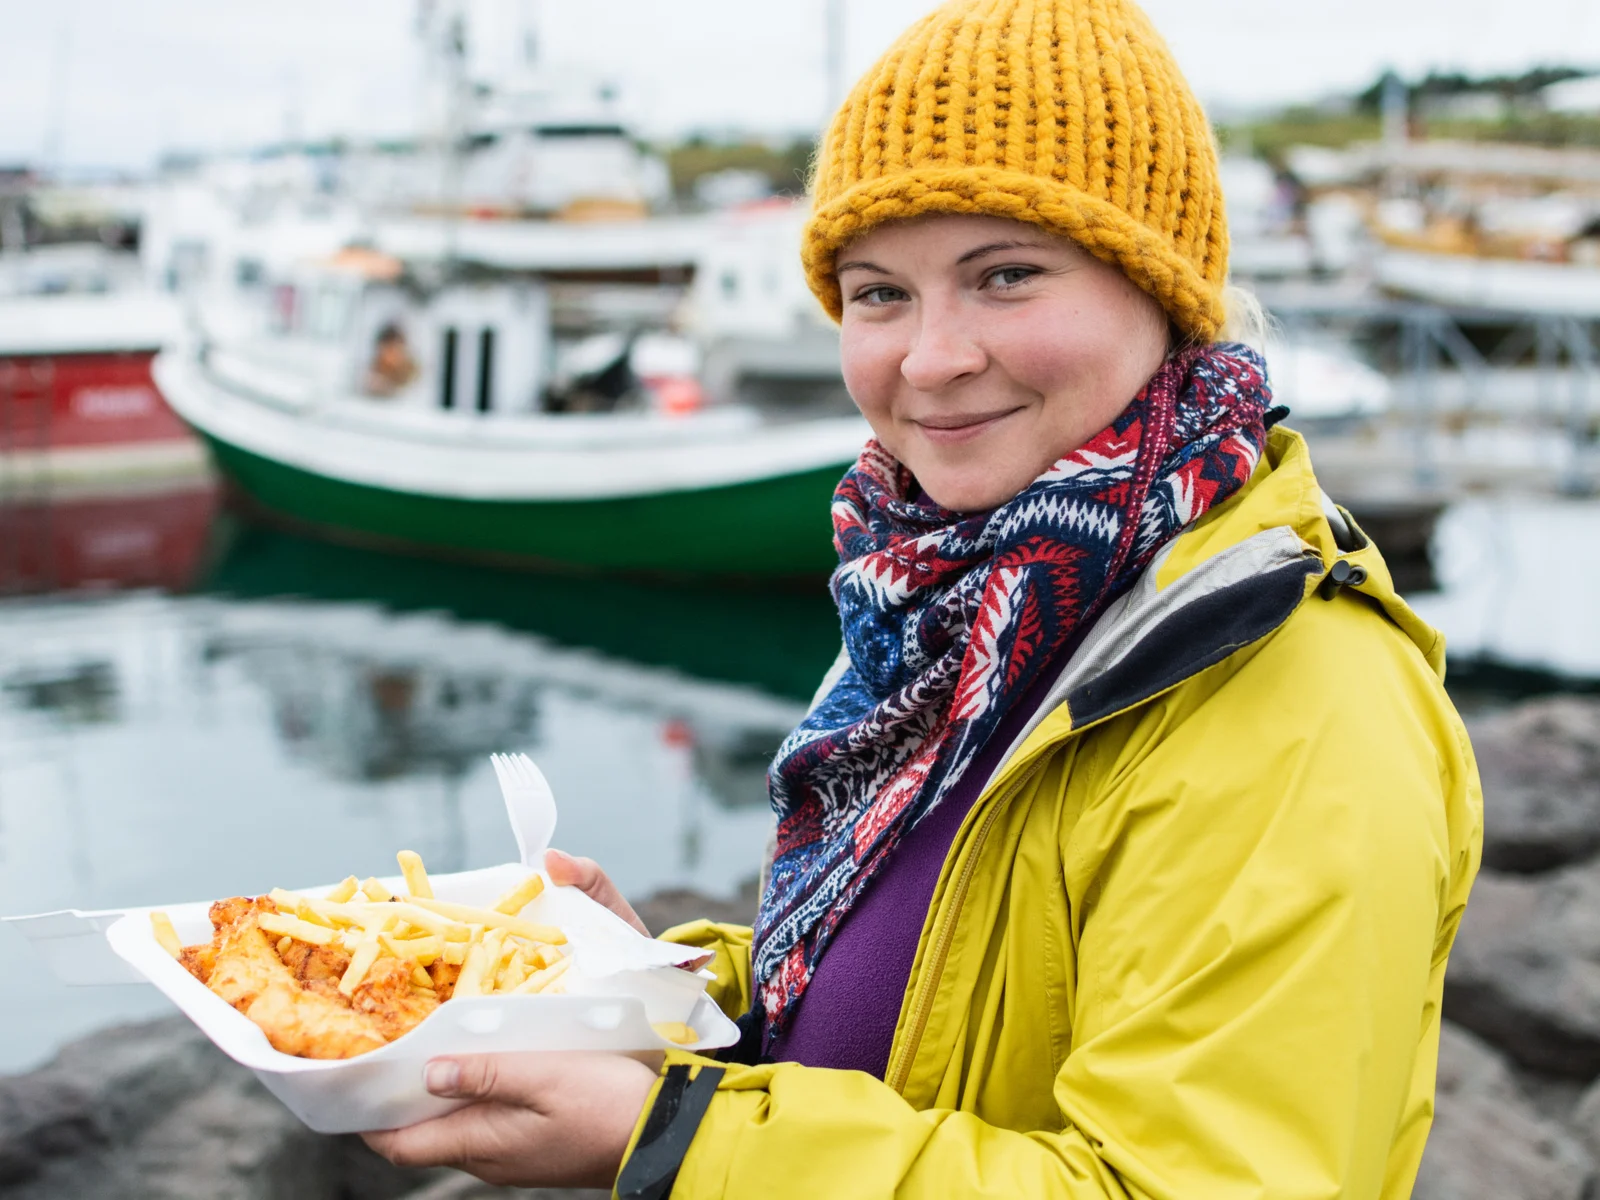 Woman eating a small portion of fish and chips, a popular dish served at Iceland's best restaurants